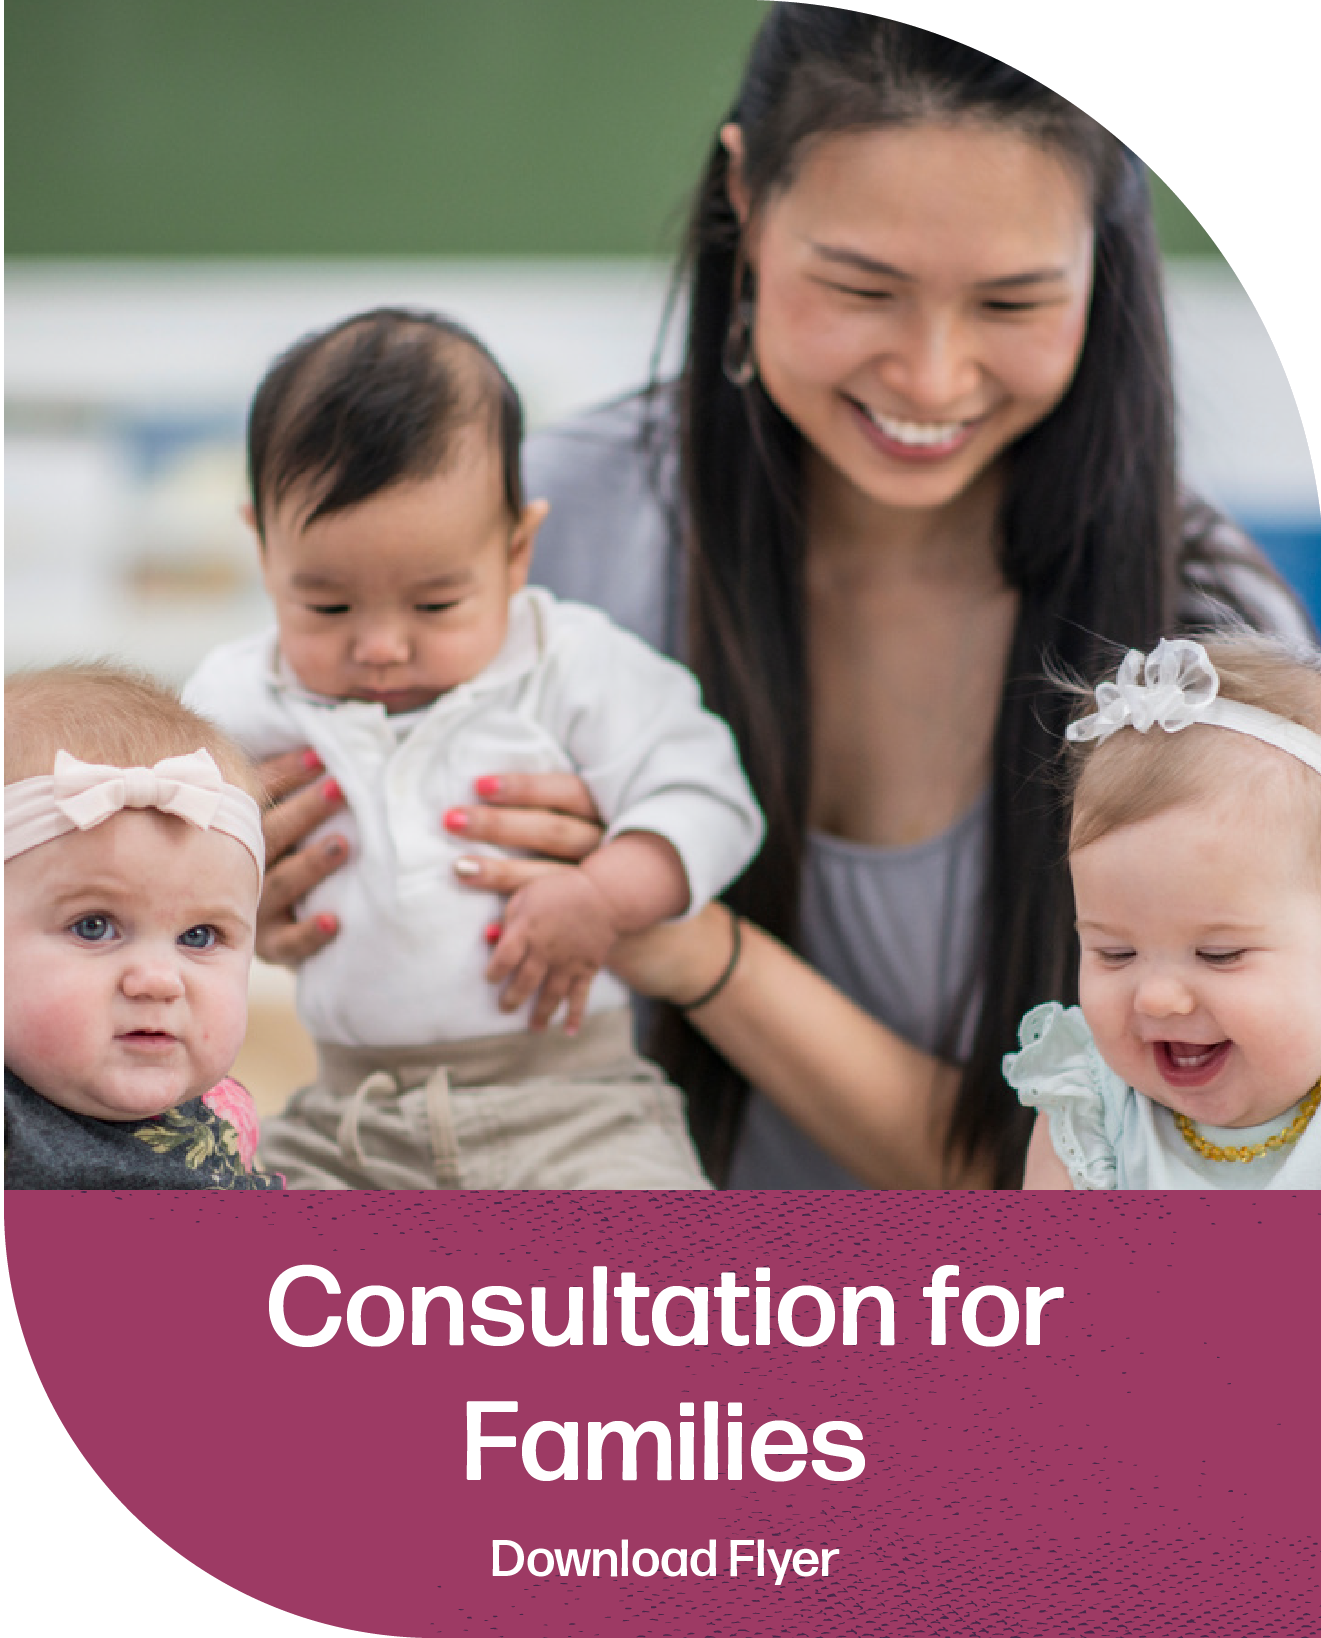 Benefits of Our Consultation Program for Families Flyer